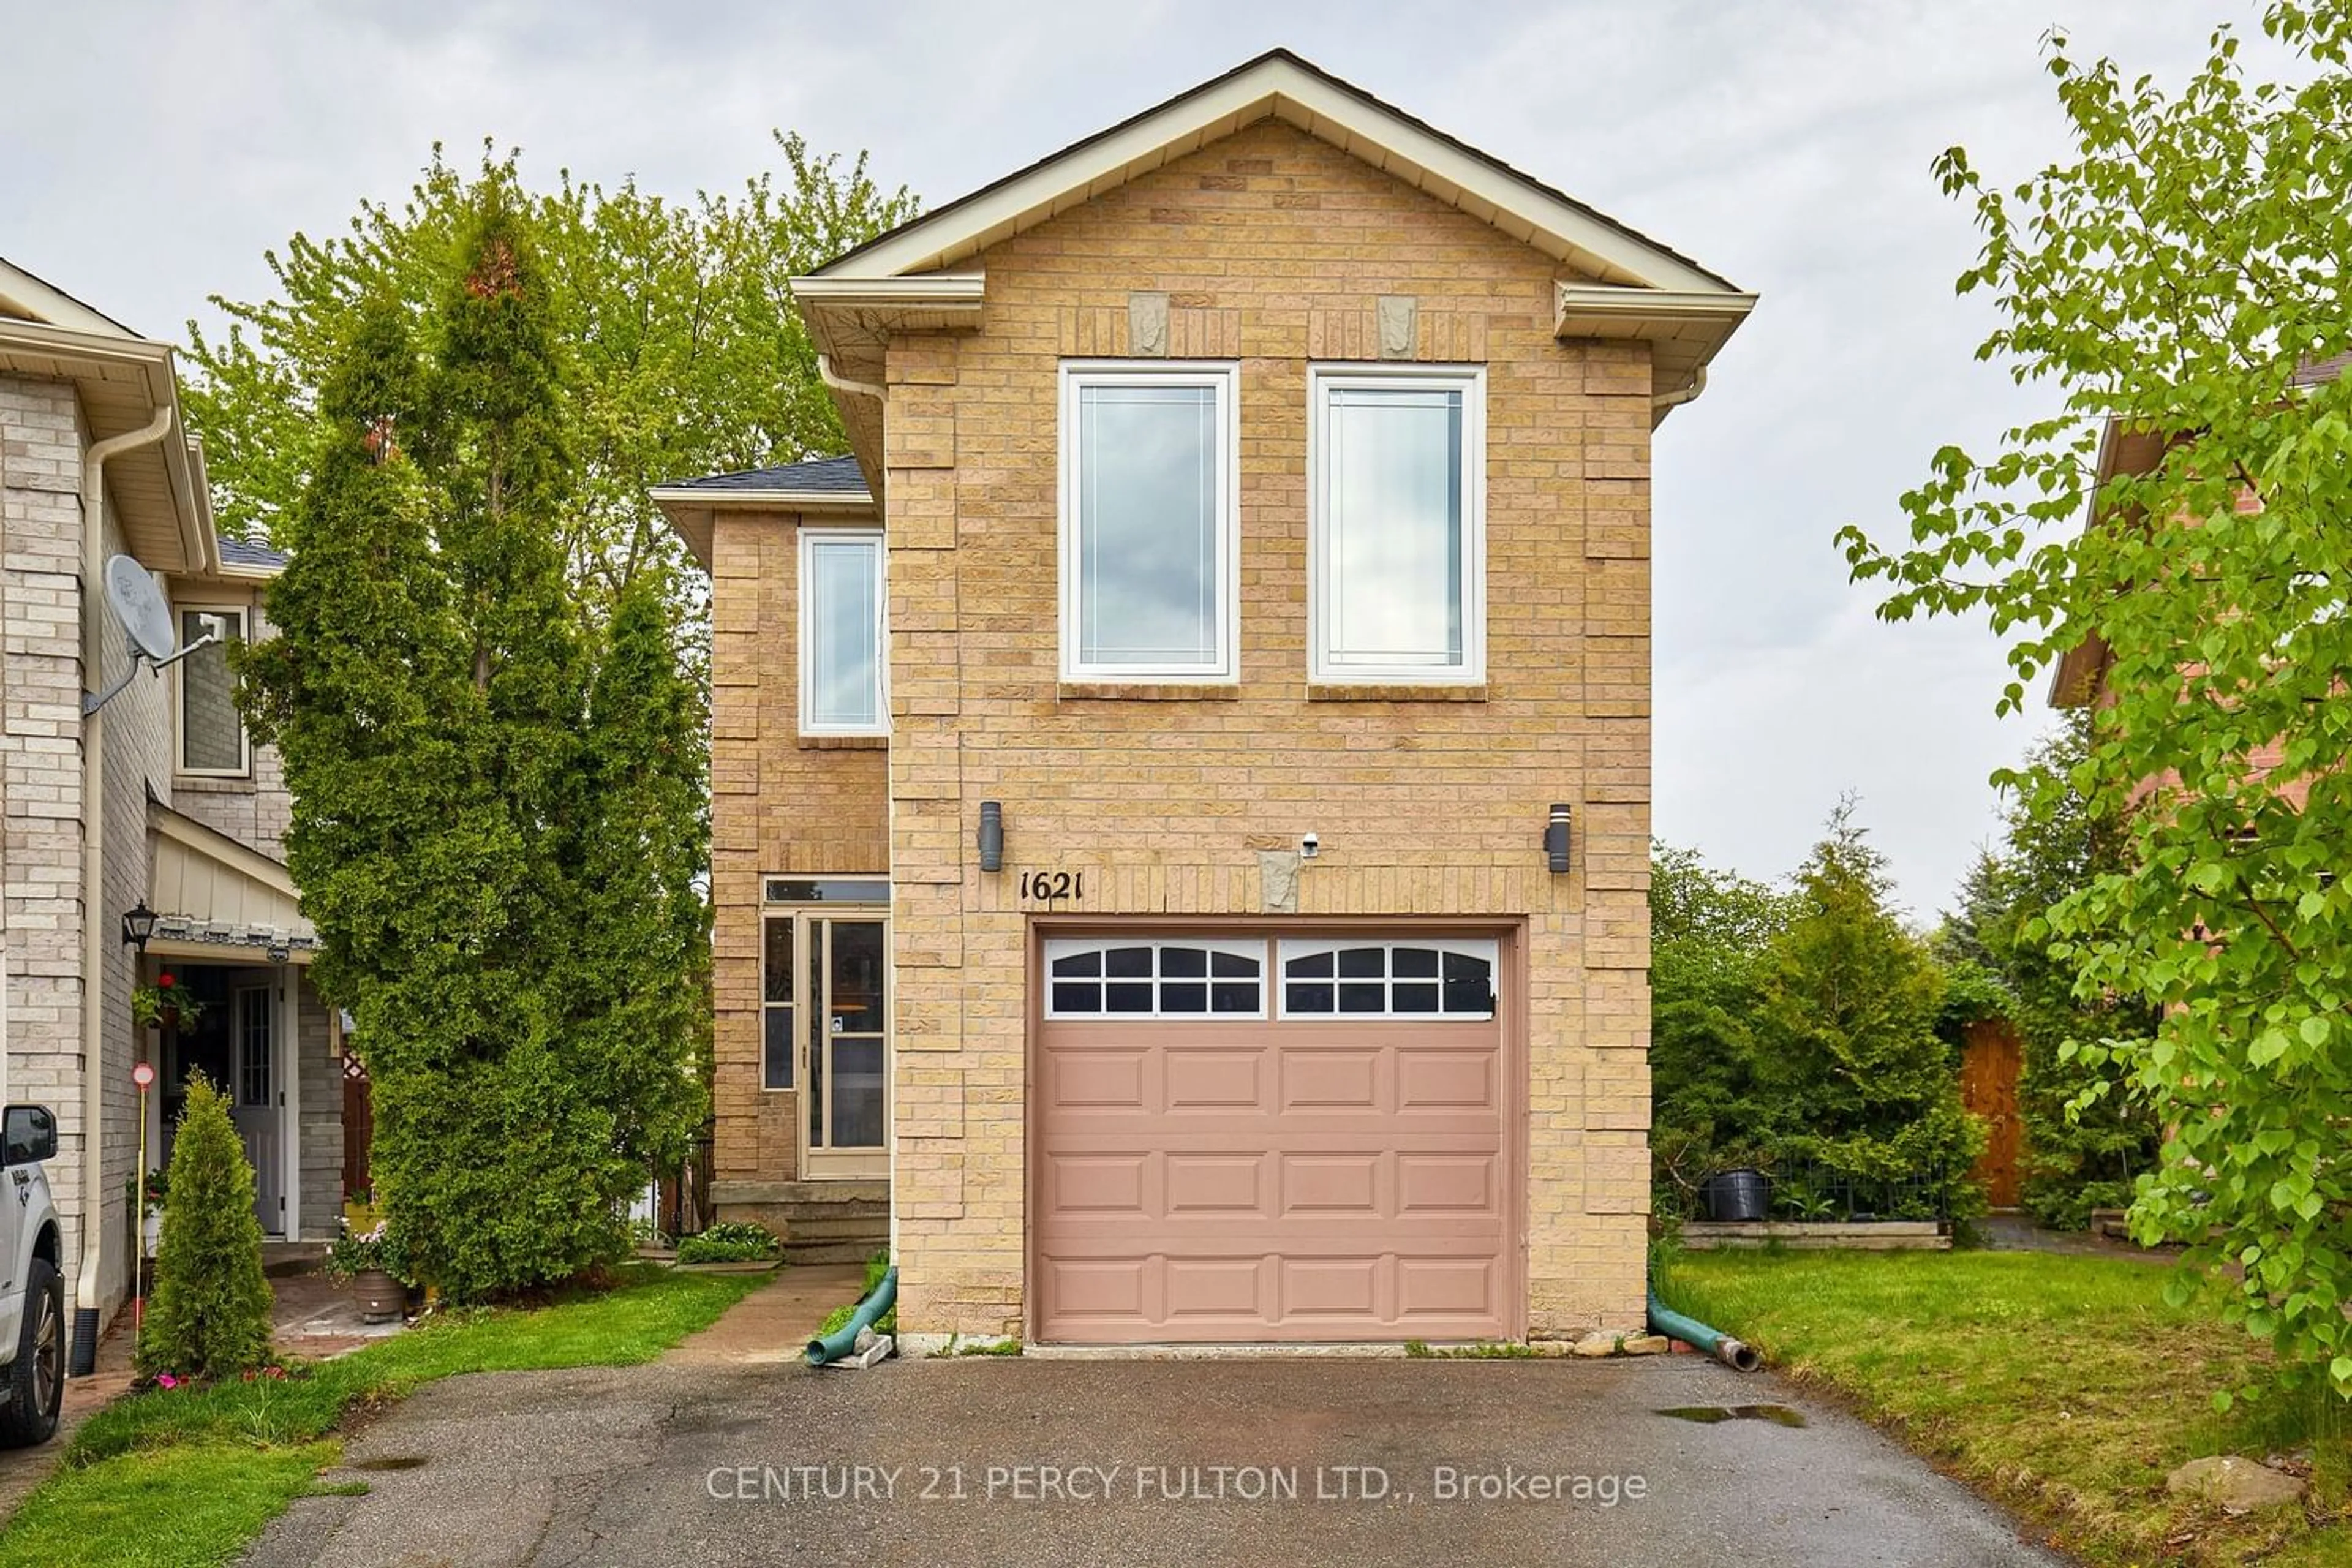 Home with brick exterior material for 1621 Gandalf Crt, Pickering Ontario L1X 2A3